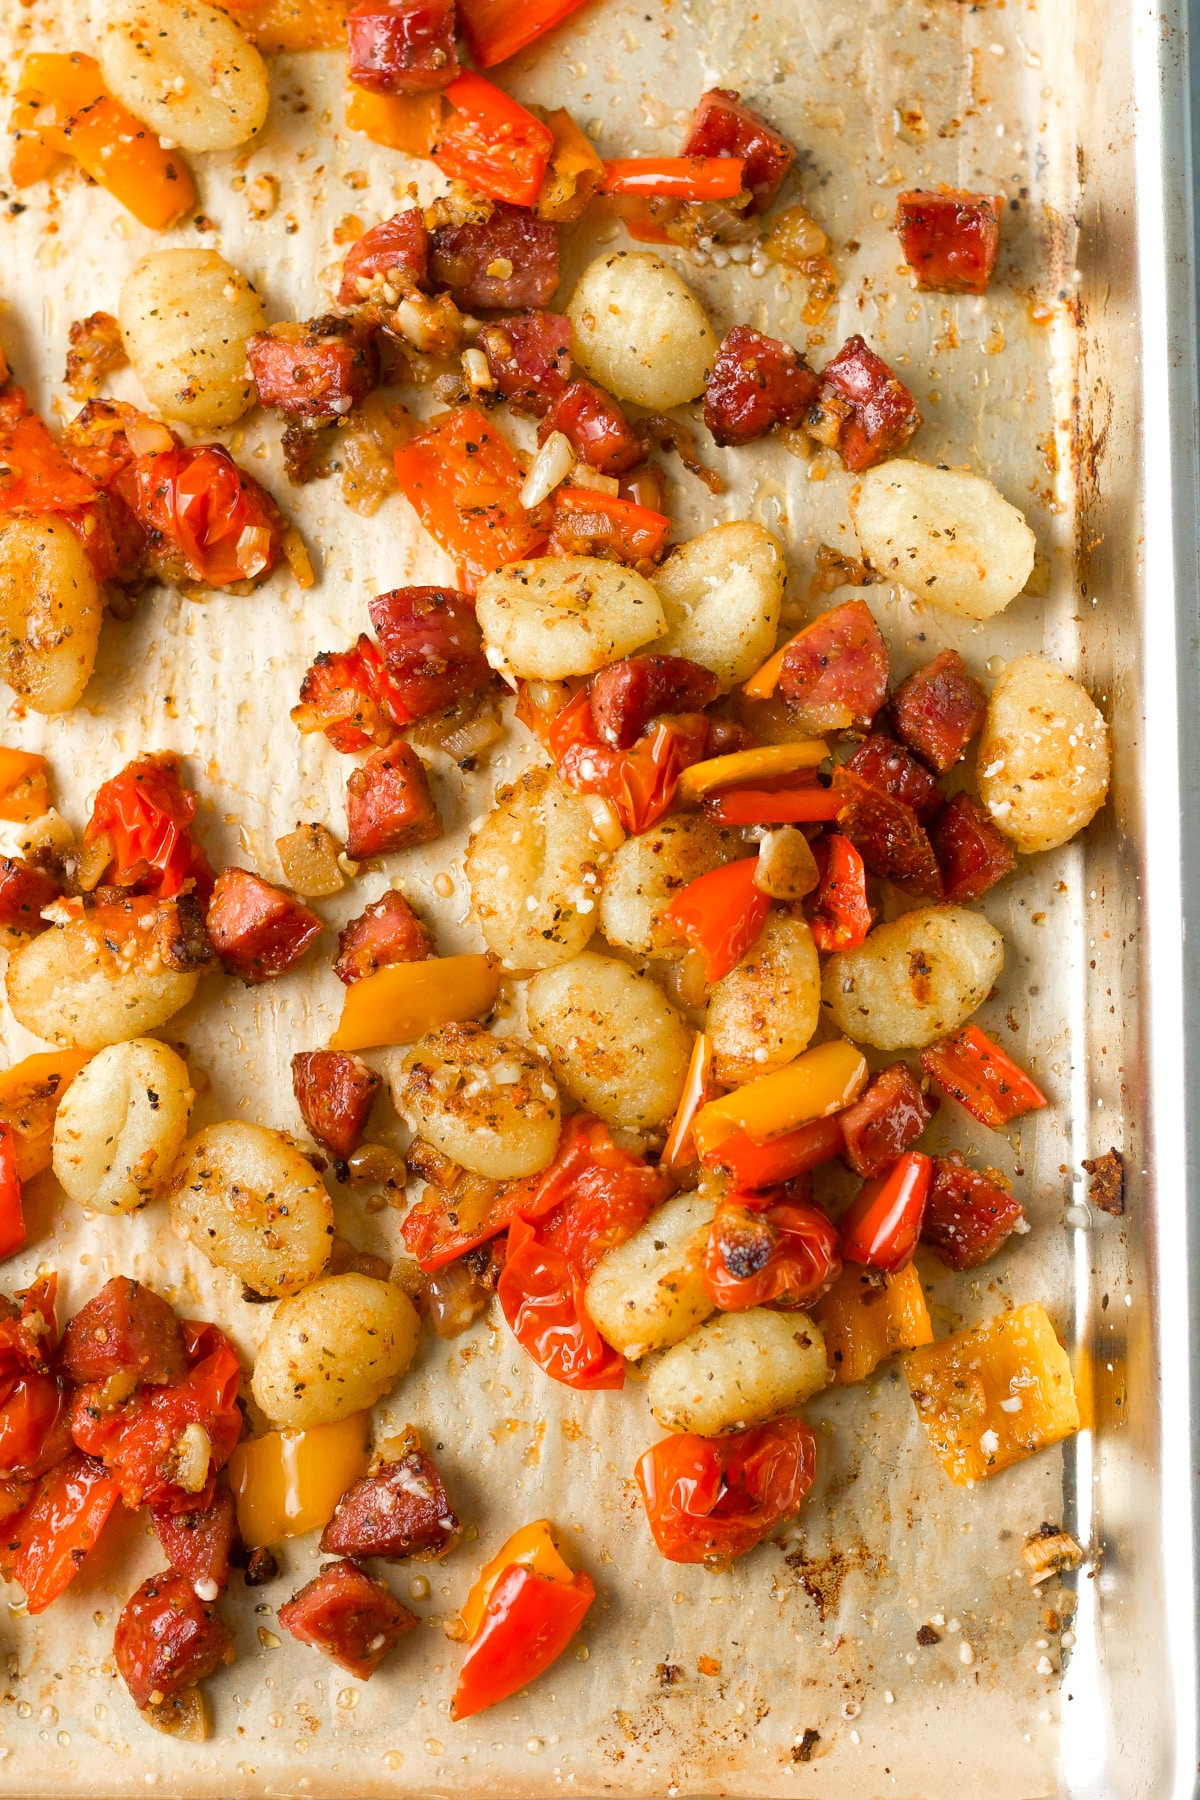 Cooked gnocchi, sausage and peppers on sheet pan.